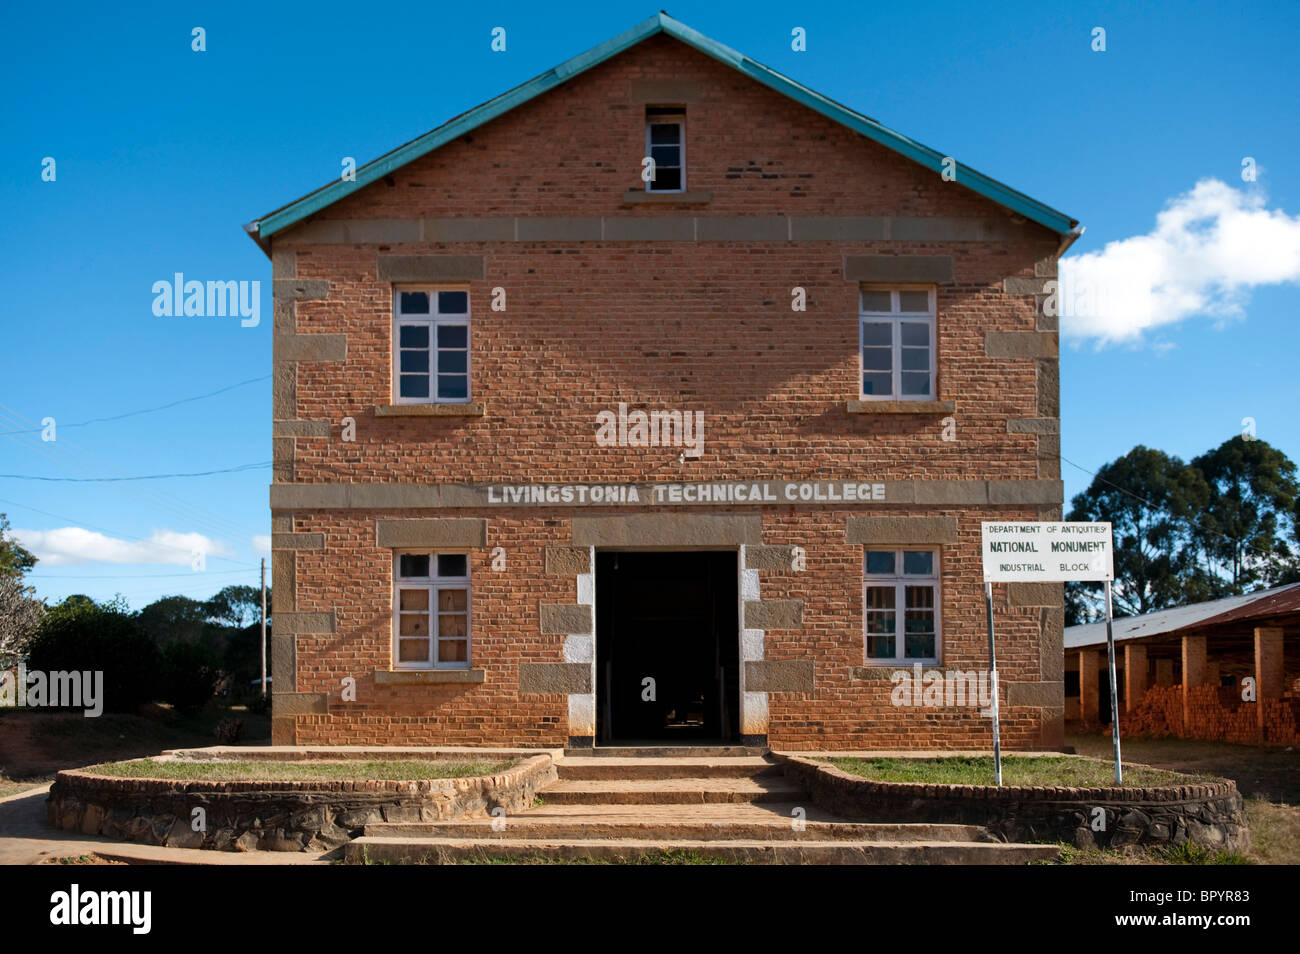 Livingstonial technical collage is a National monument, Livingstonia, Malawi Stock Photo